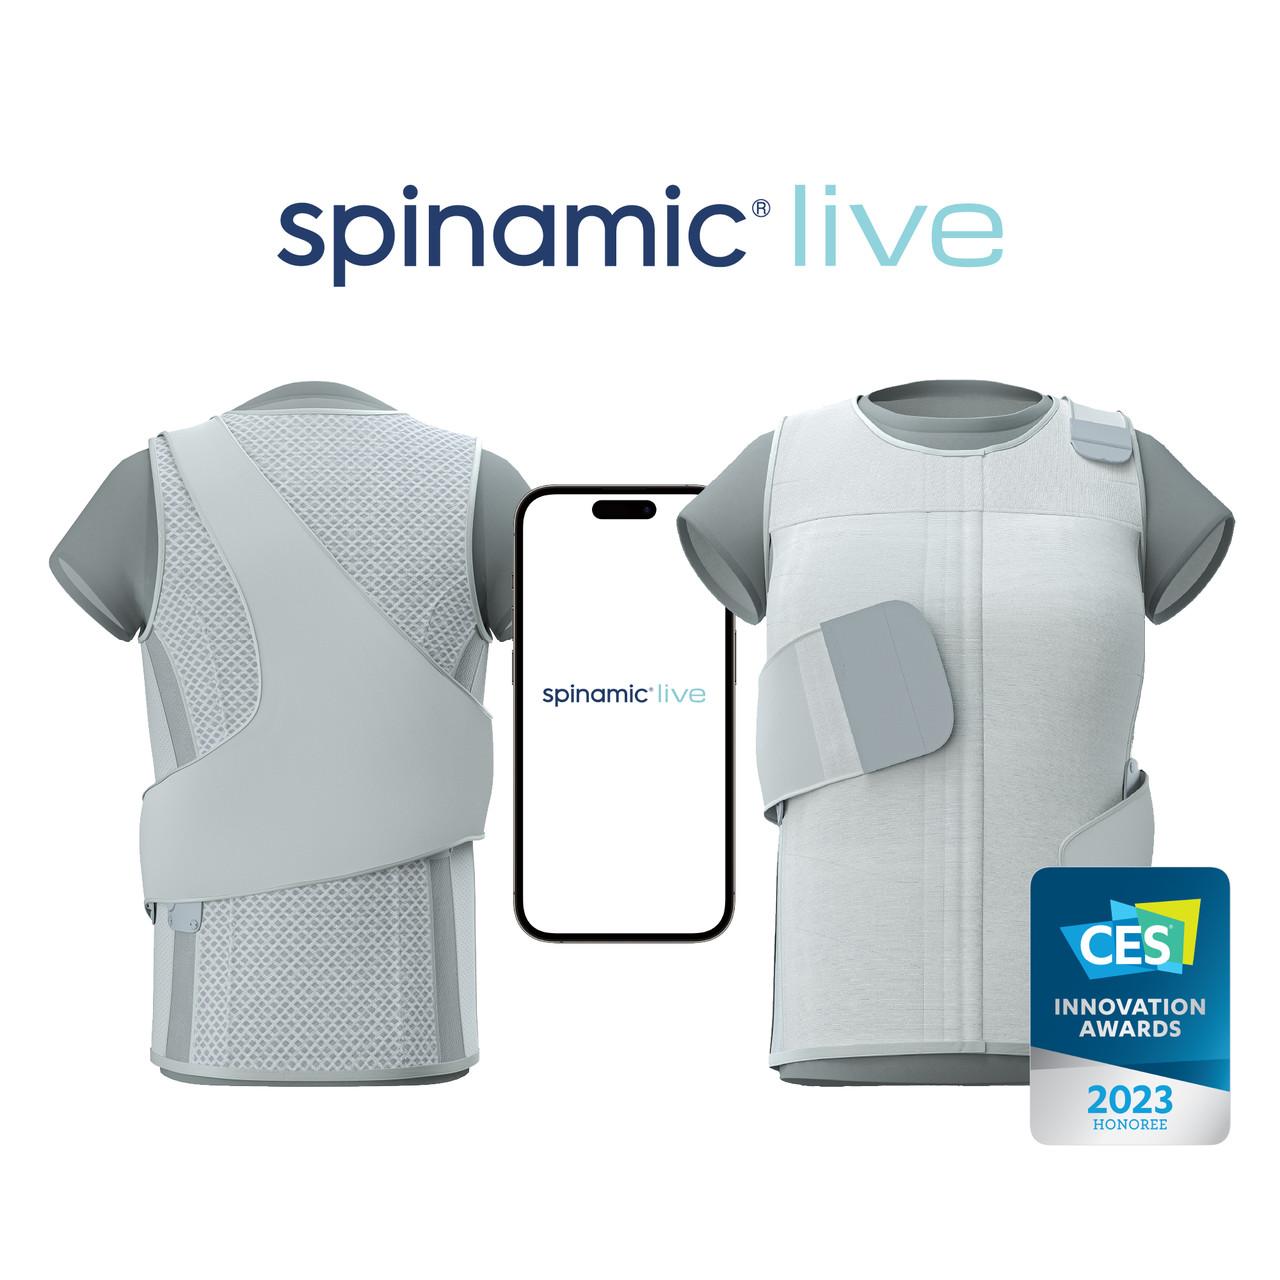 Spinamic Live named as CES 2023 Innovation Awards Honoree